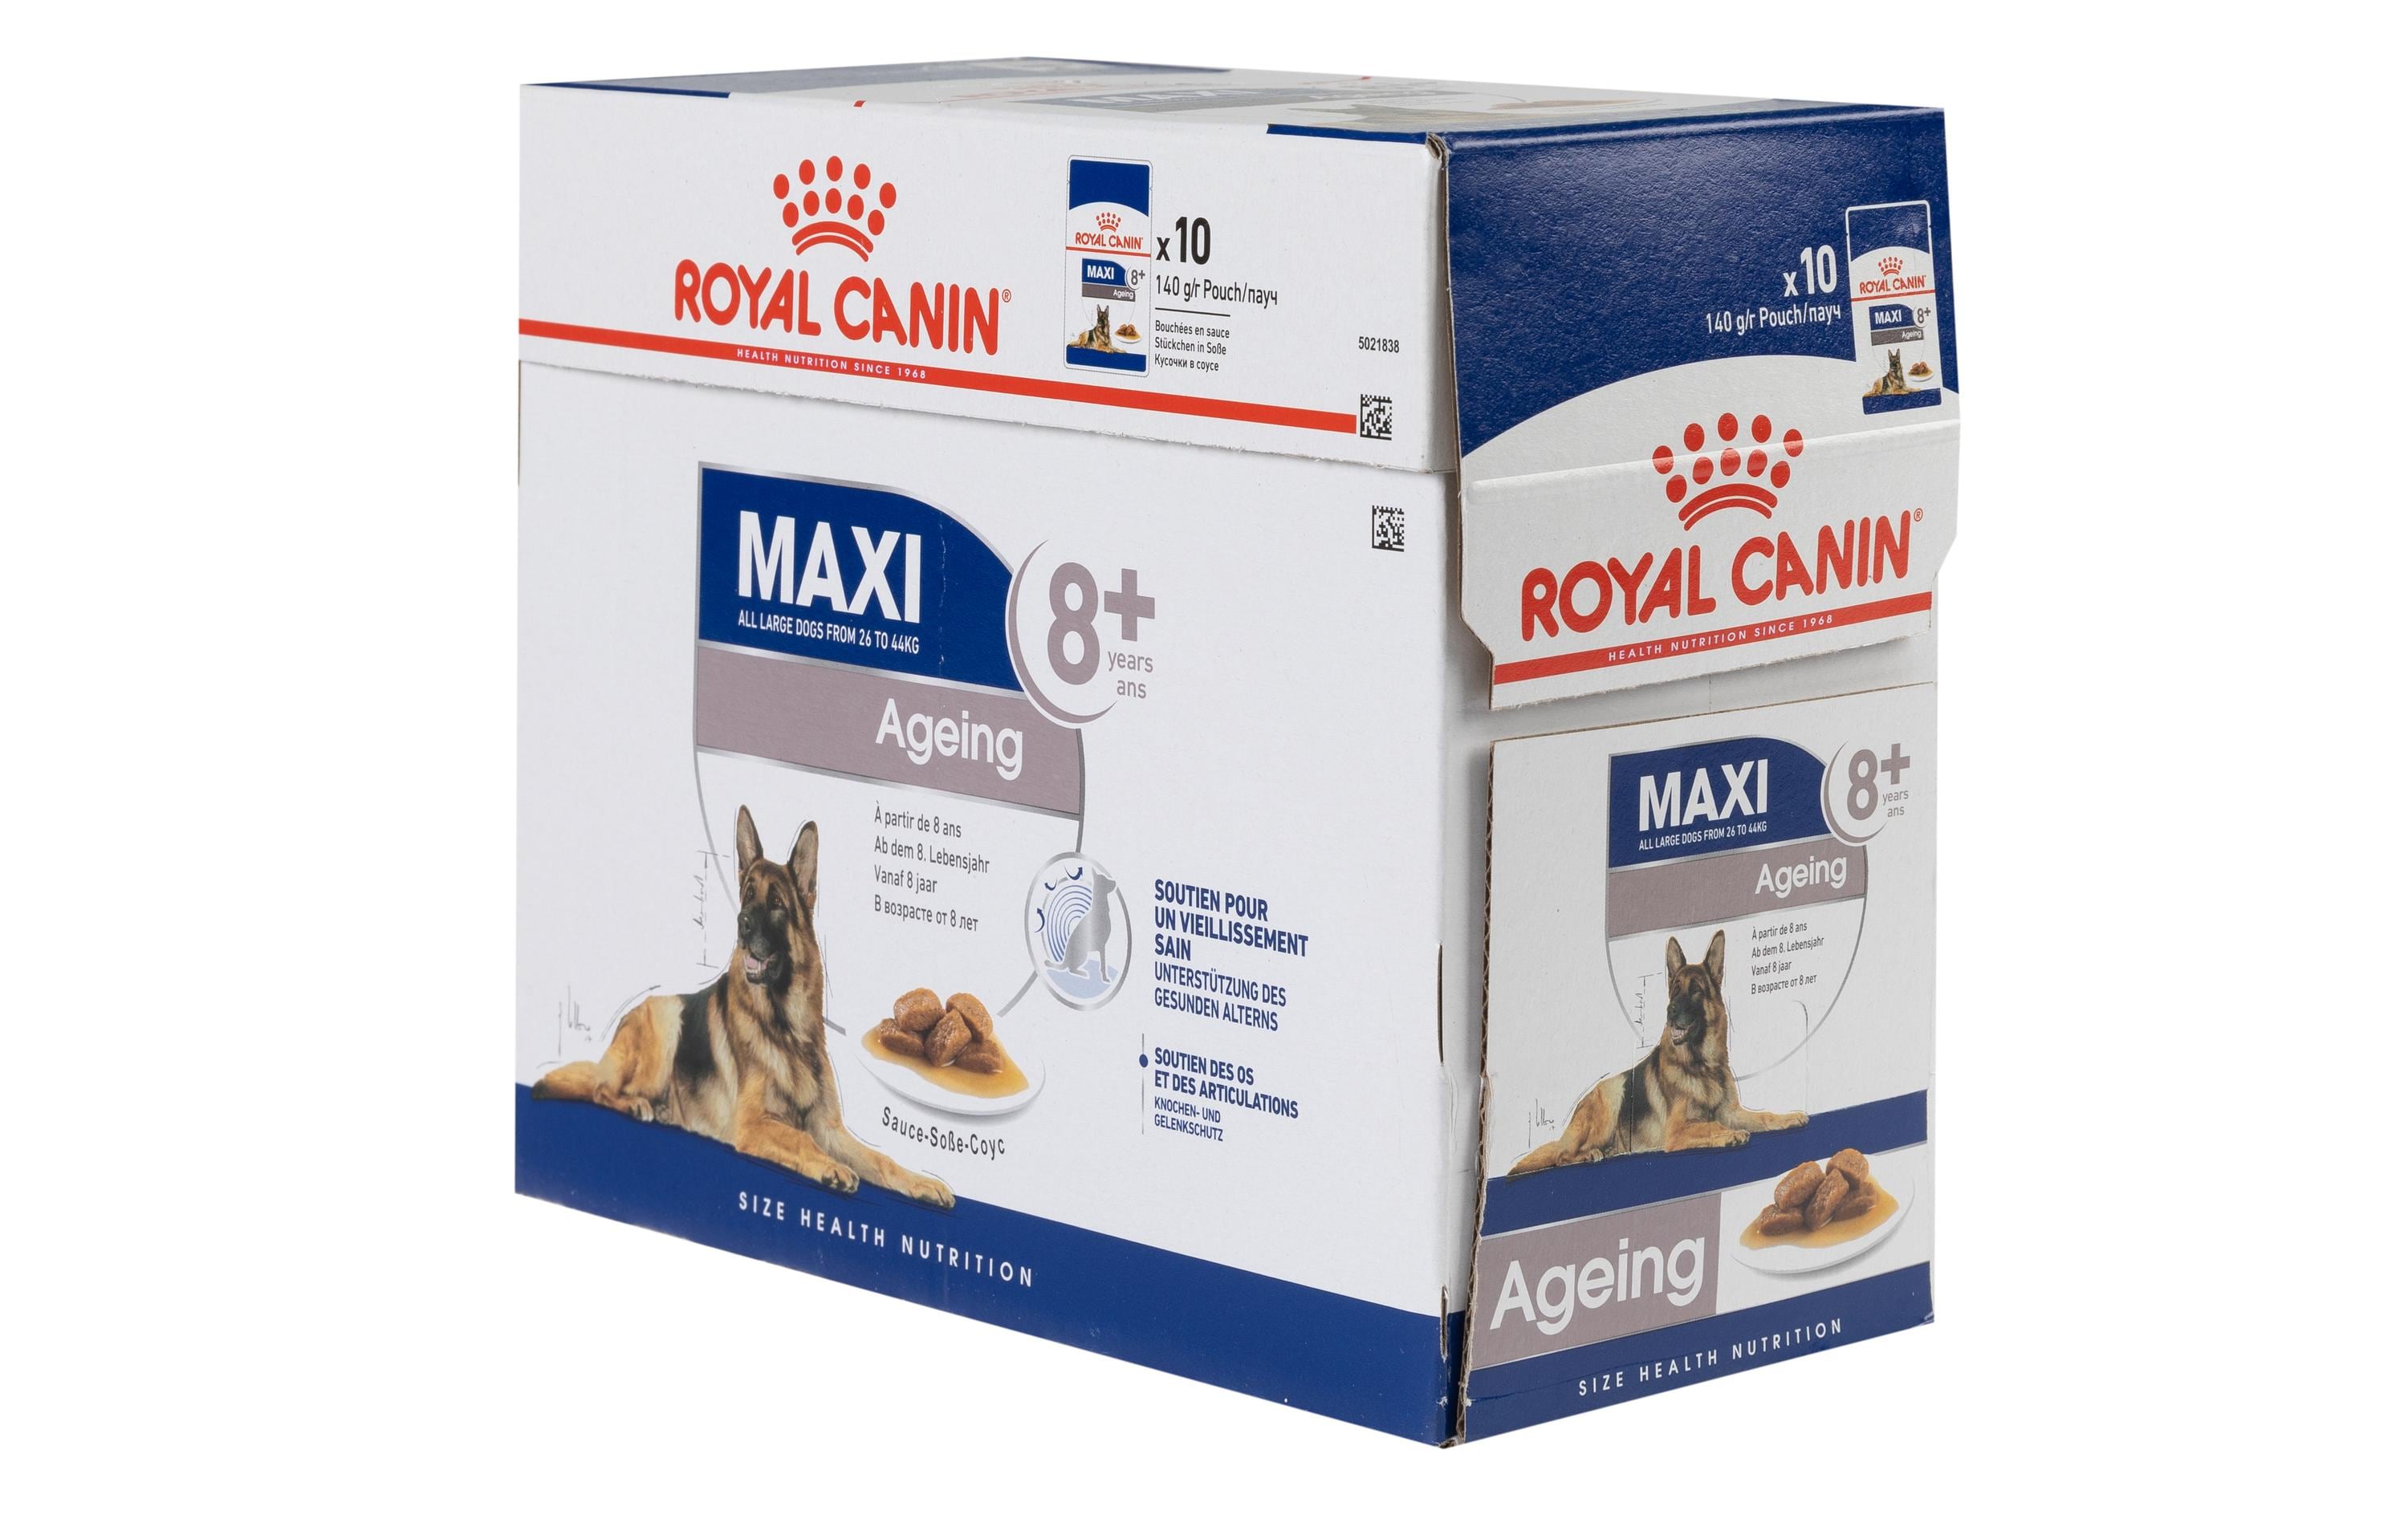 Royal Canin Nassfutter Health Nutrition Maxi Ageing 8+ Sauce, 10 x 140g